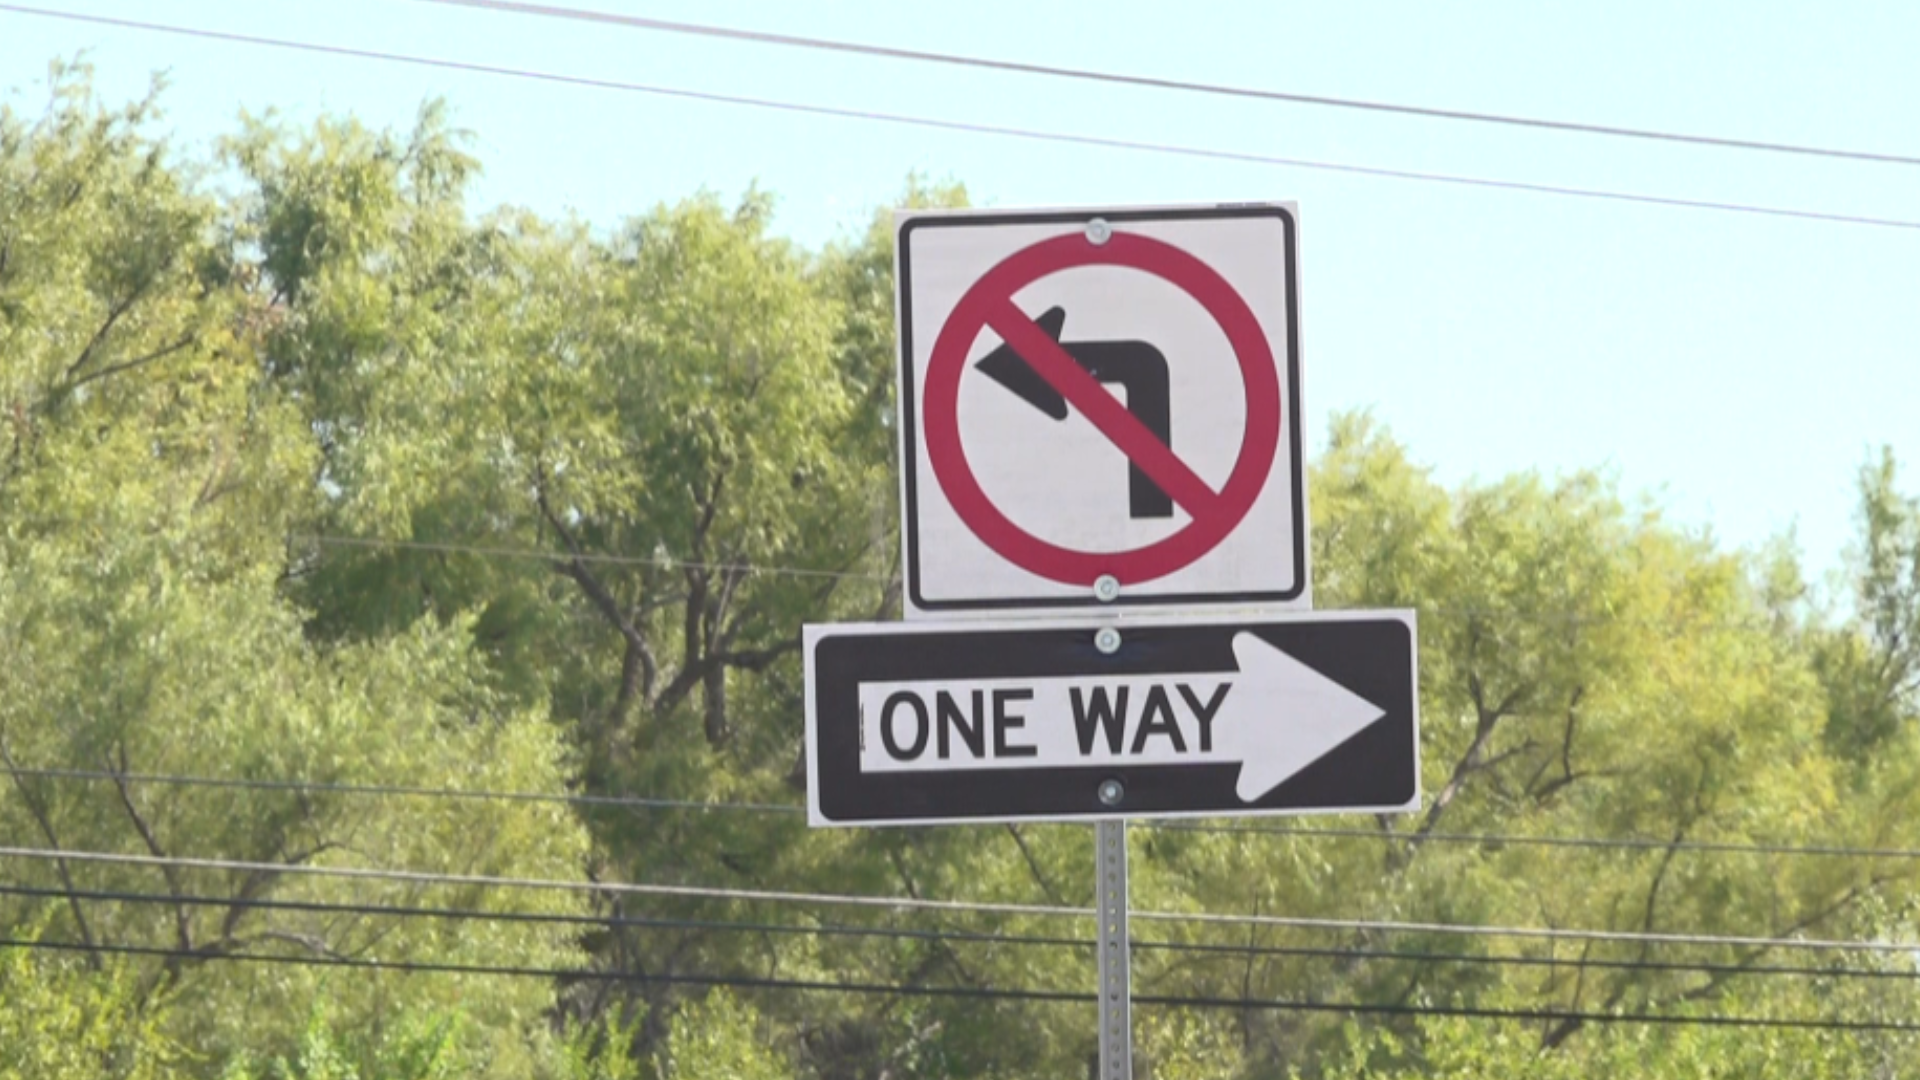 According to TxDOT, too many motorists have made illegal left turns on the frontage roads.